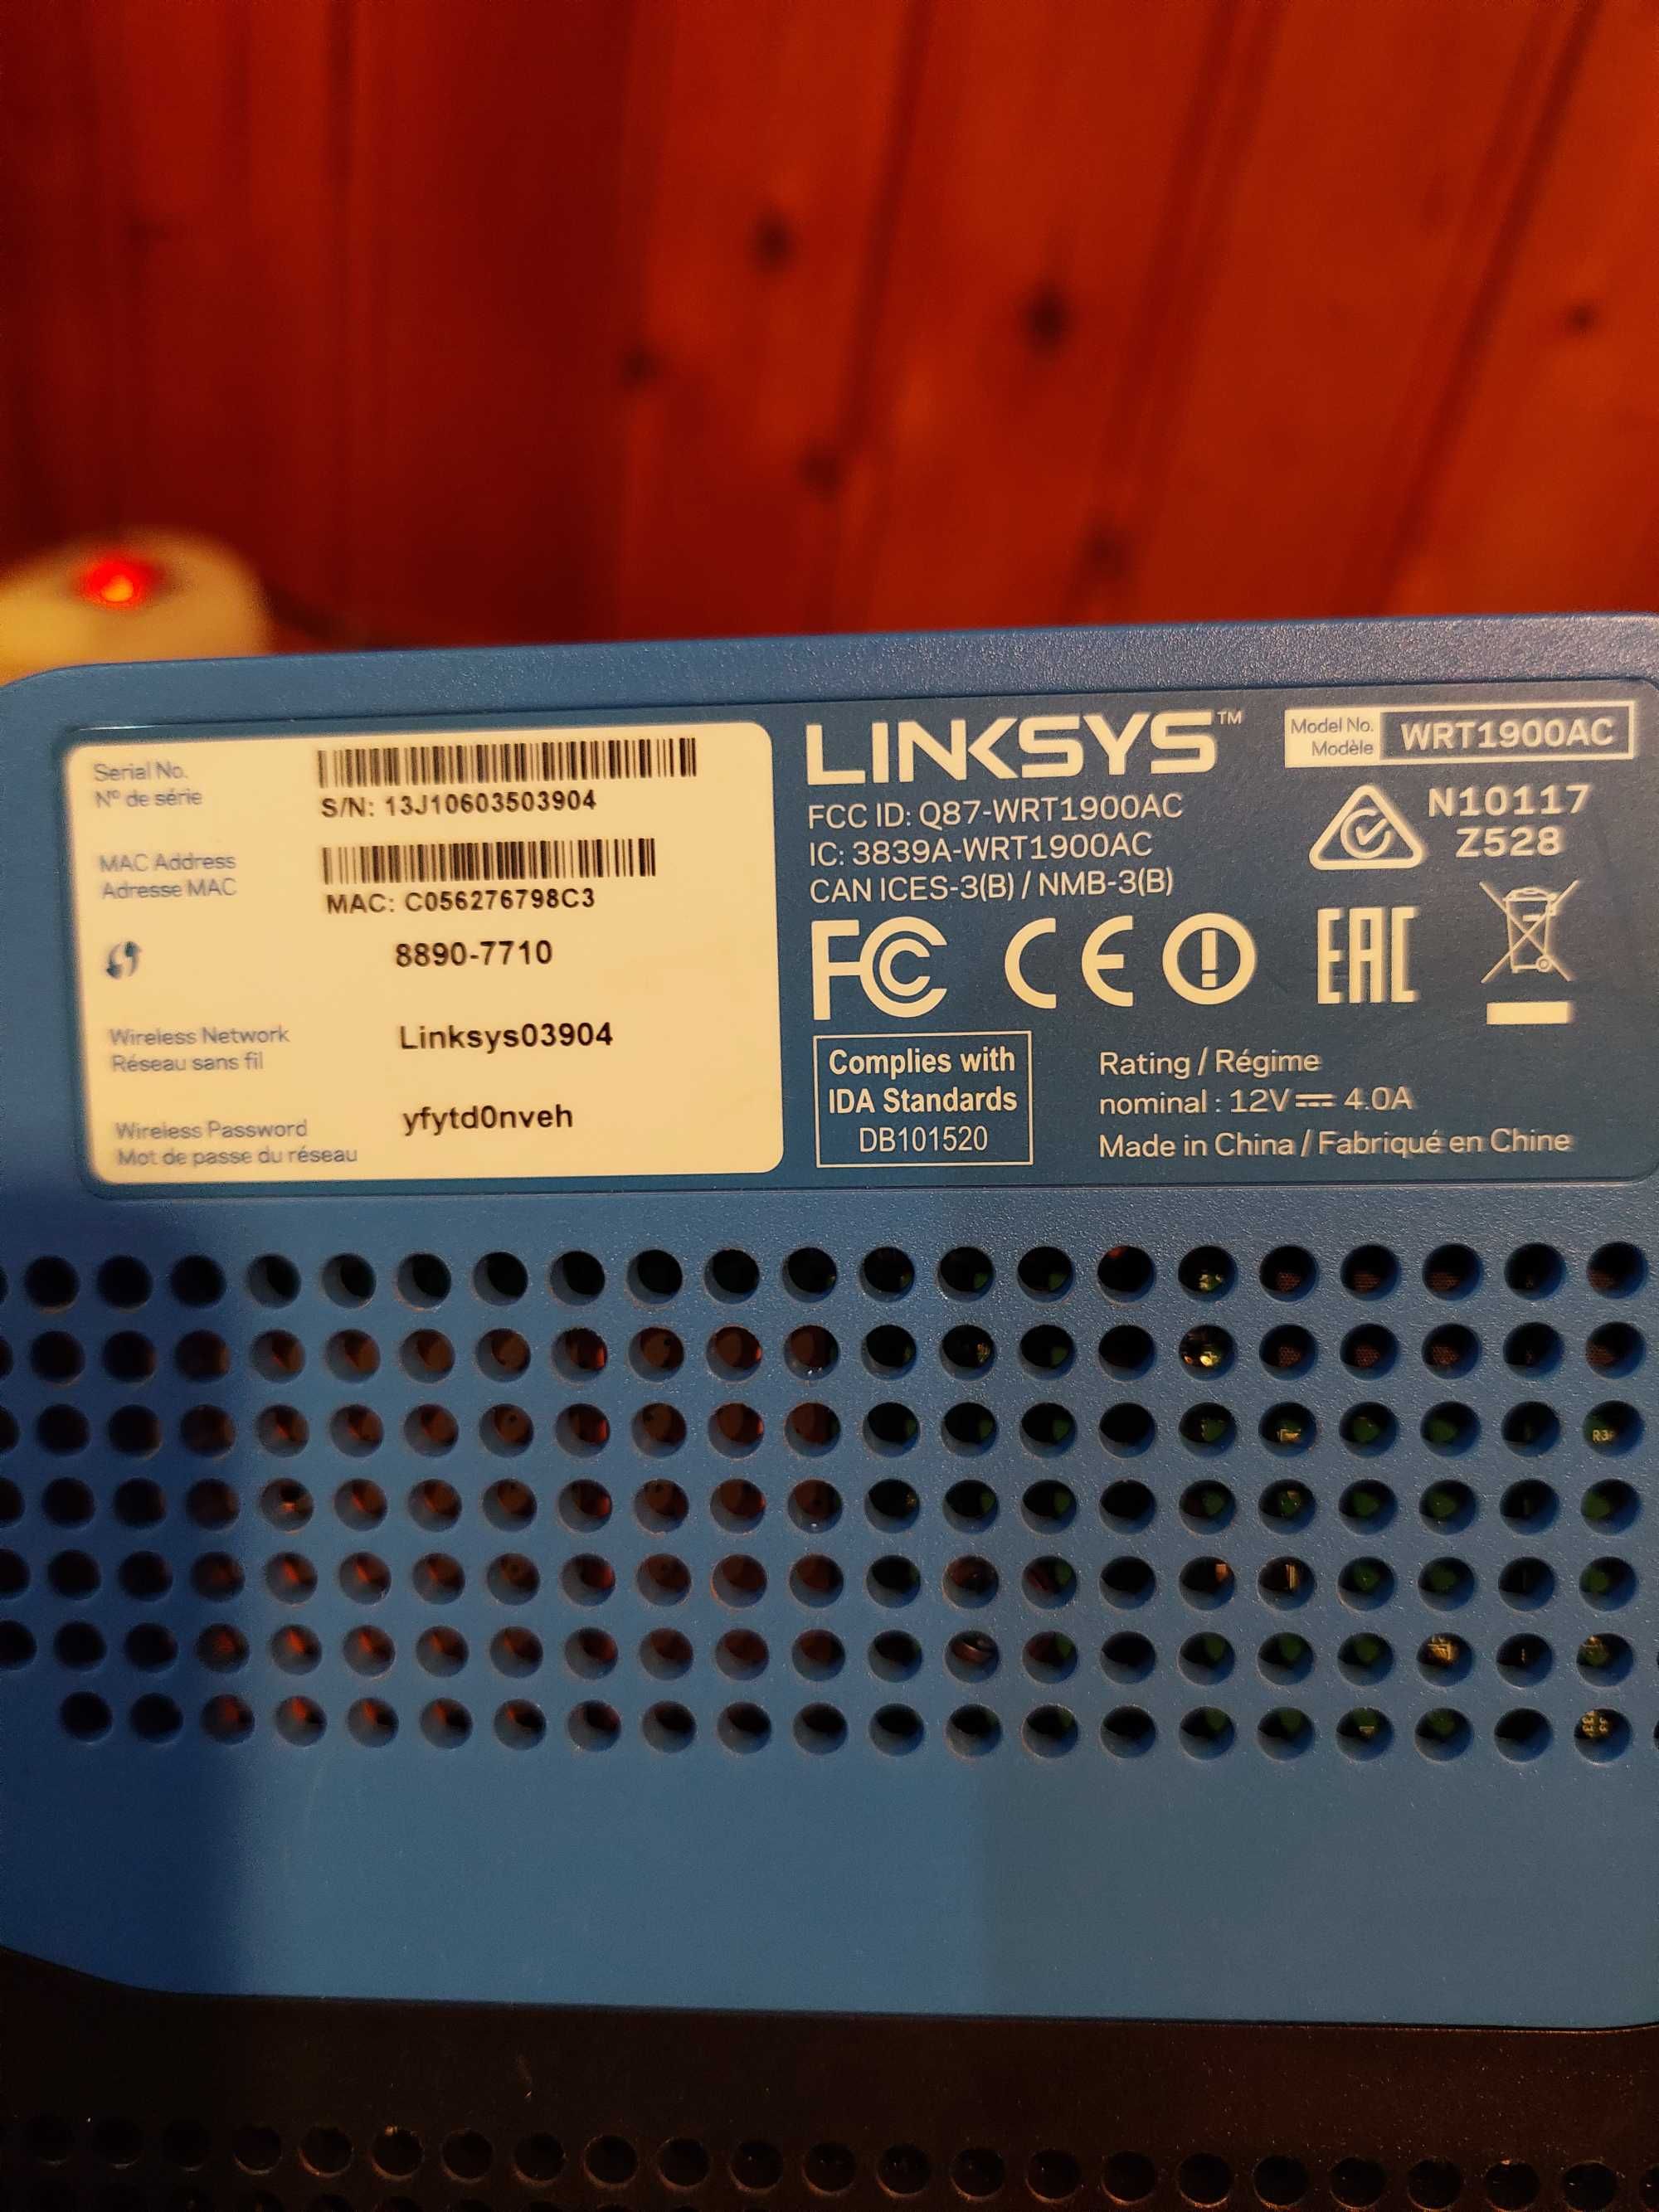 Router Linksys WRT1900AC